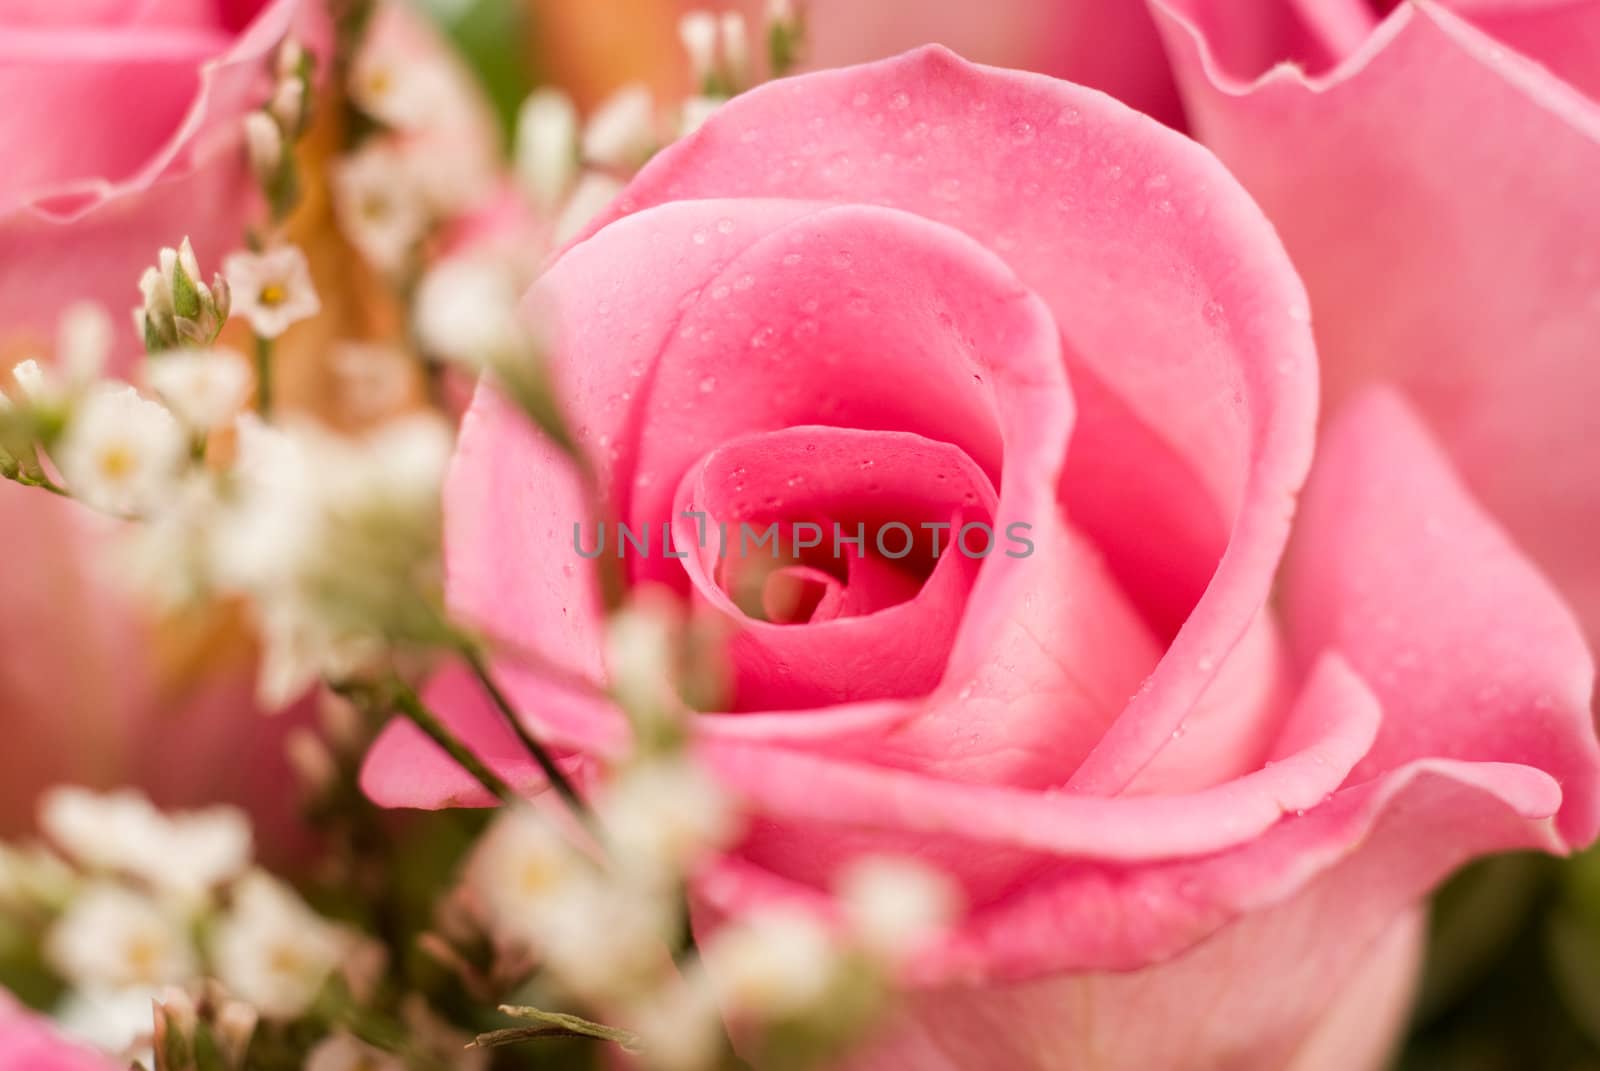 Closeup view of a pink colored rose, surrounded by small white flowers